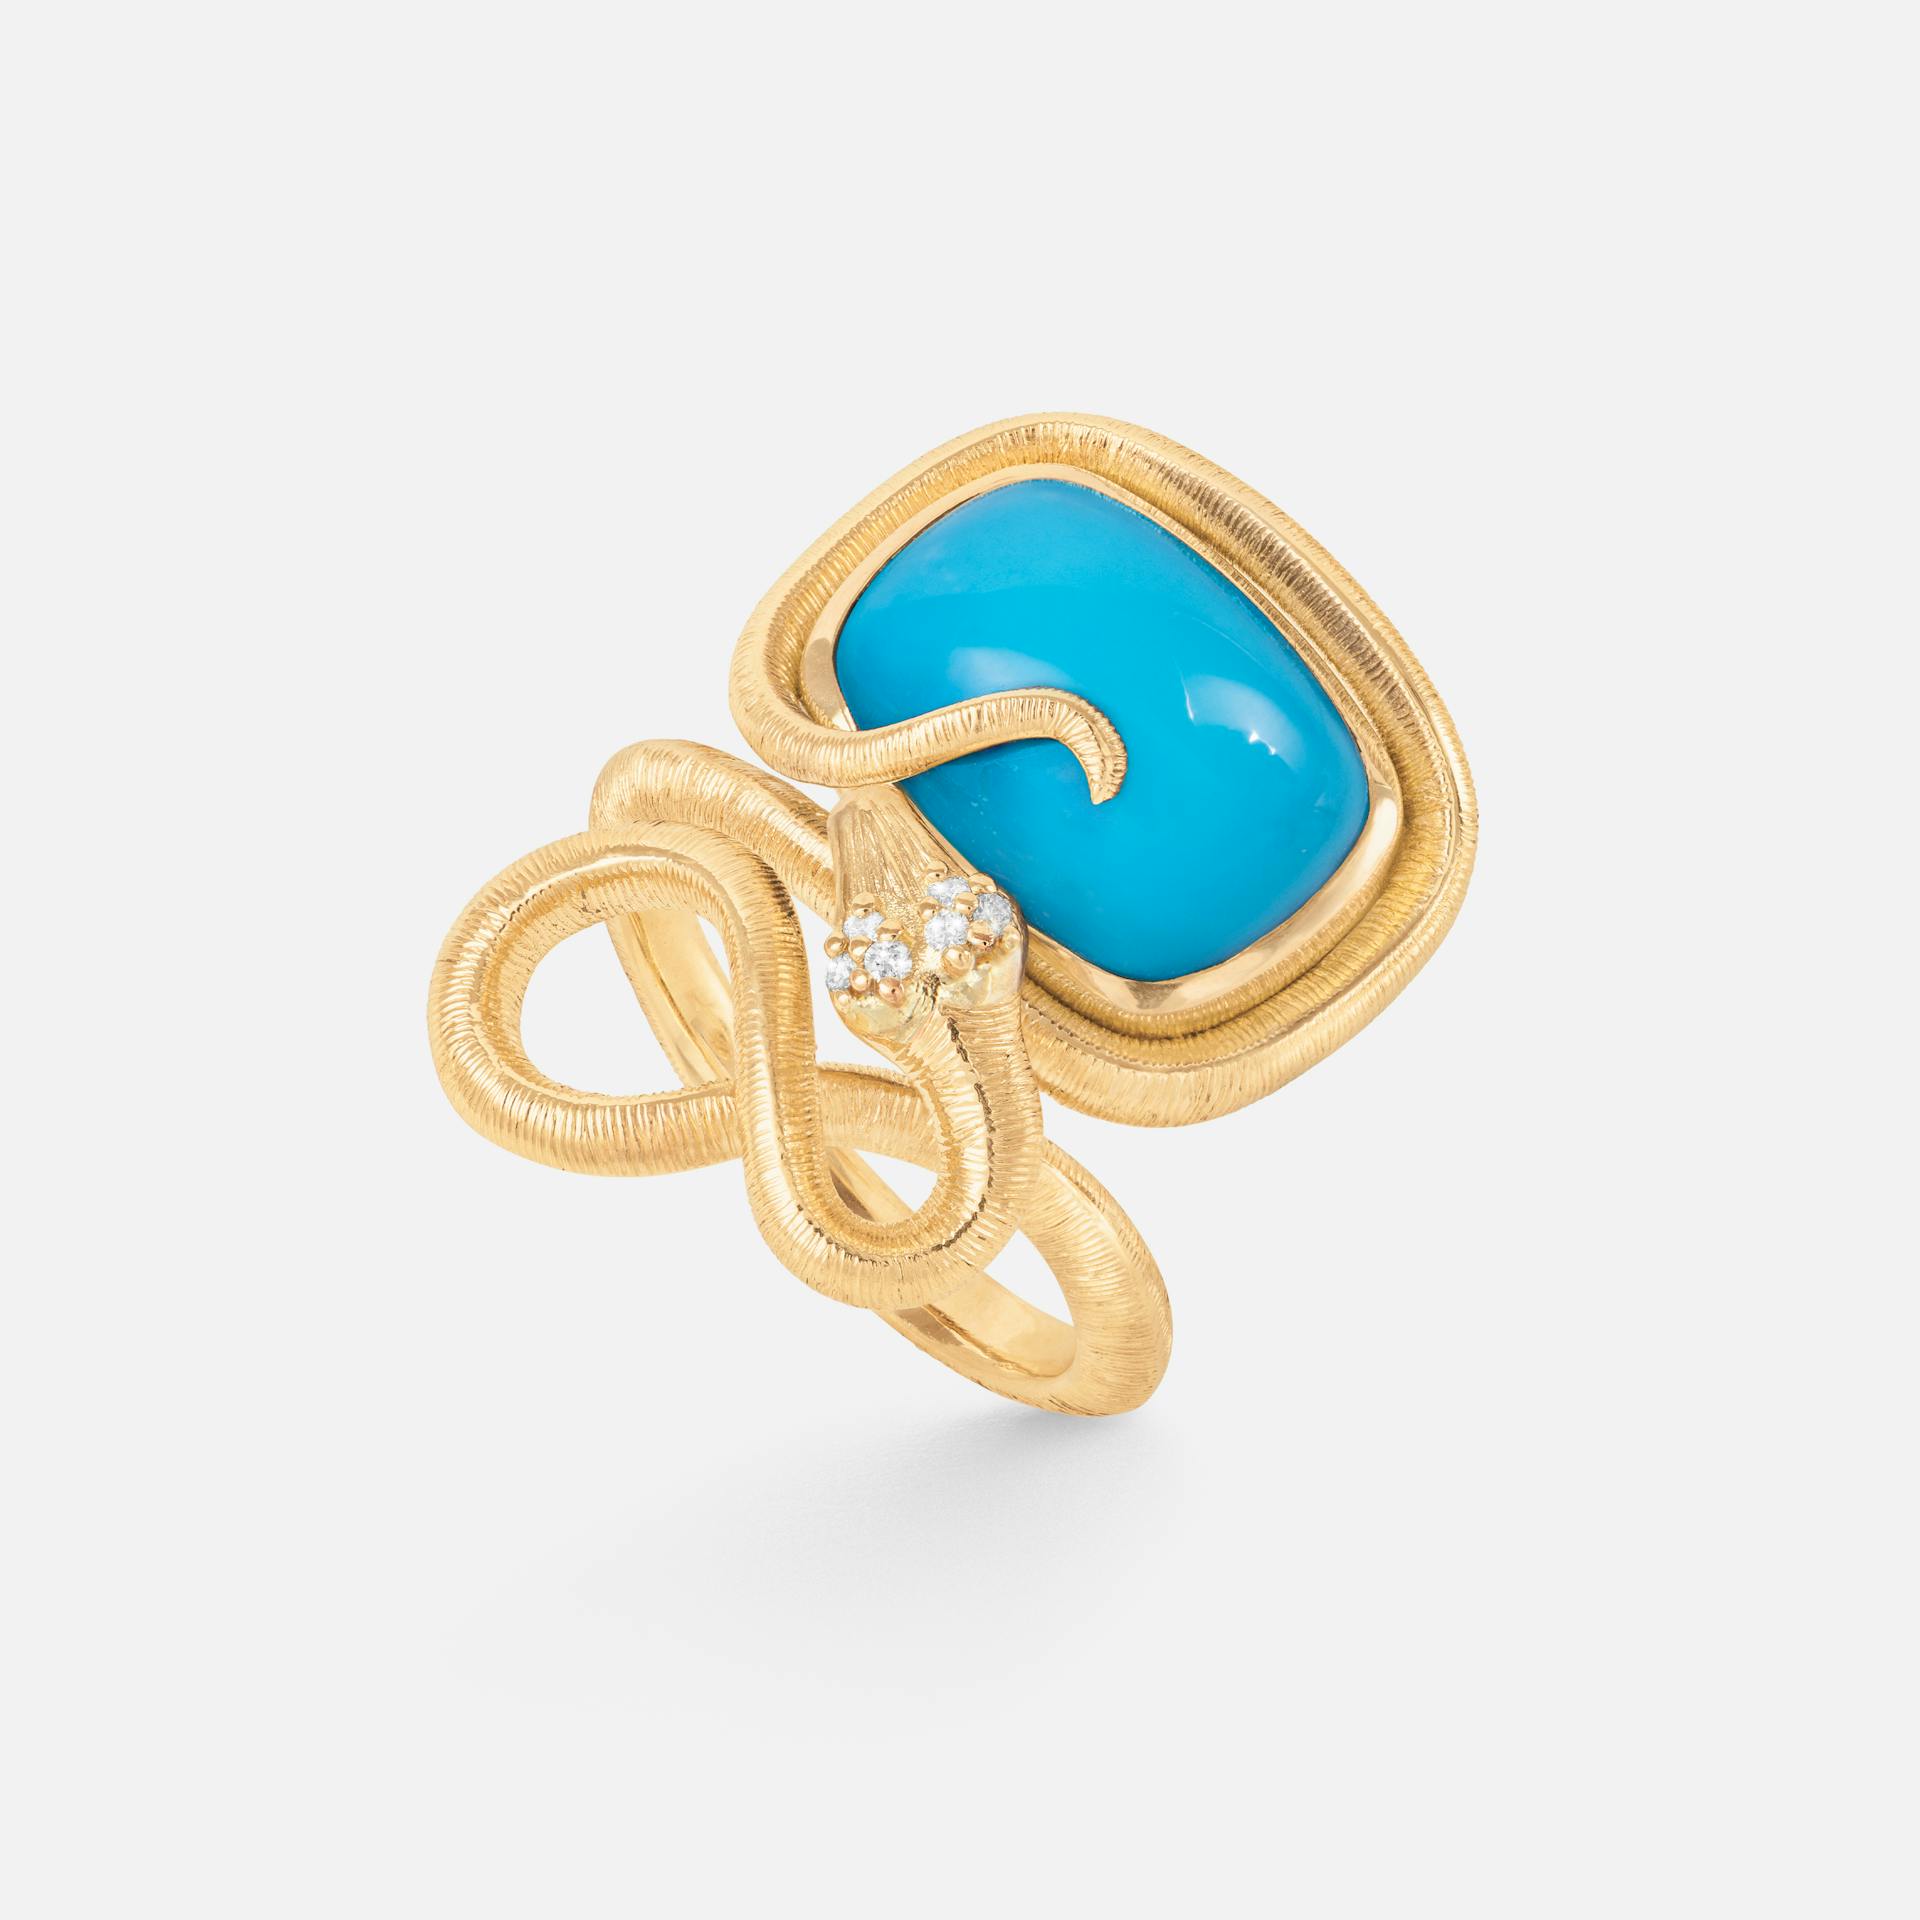 Snakes Ring in Yellow Gold with Turquoise and Diamonds  |  Ole Lynggaard Copenhagen 